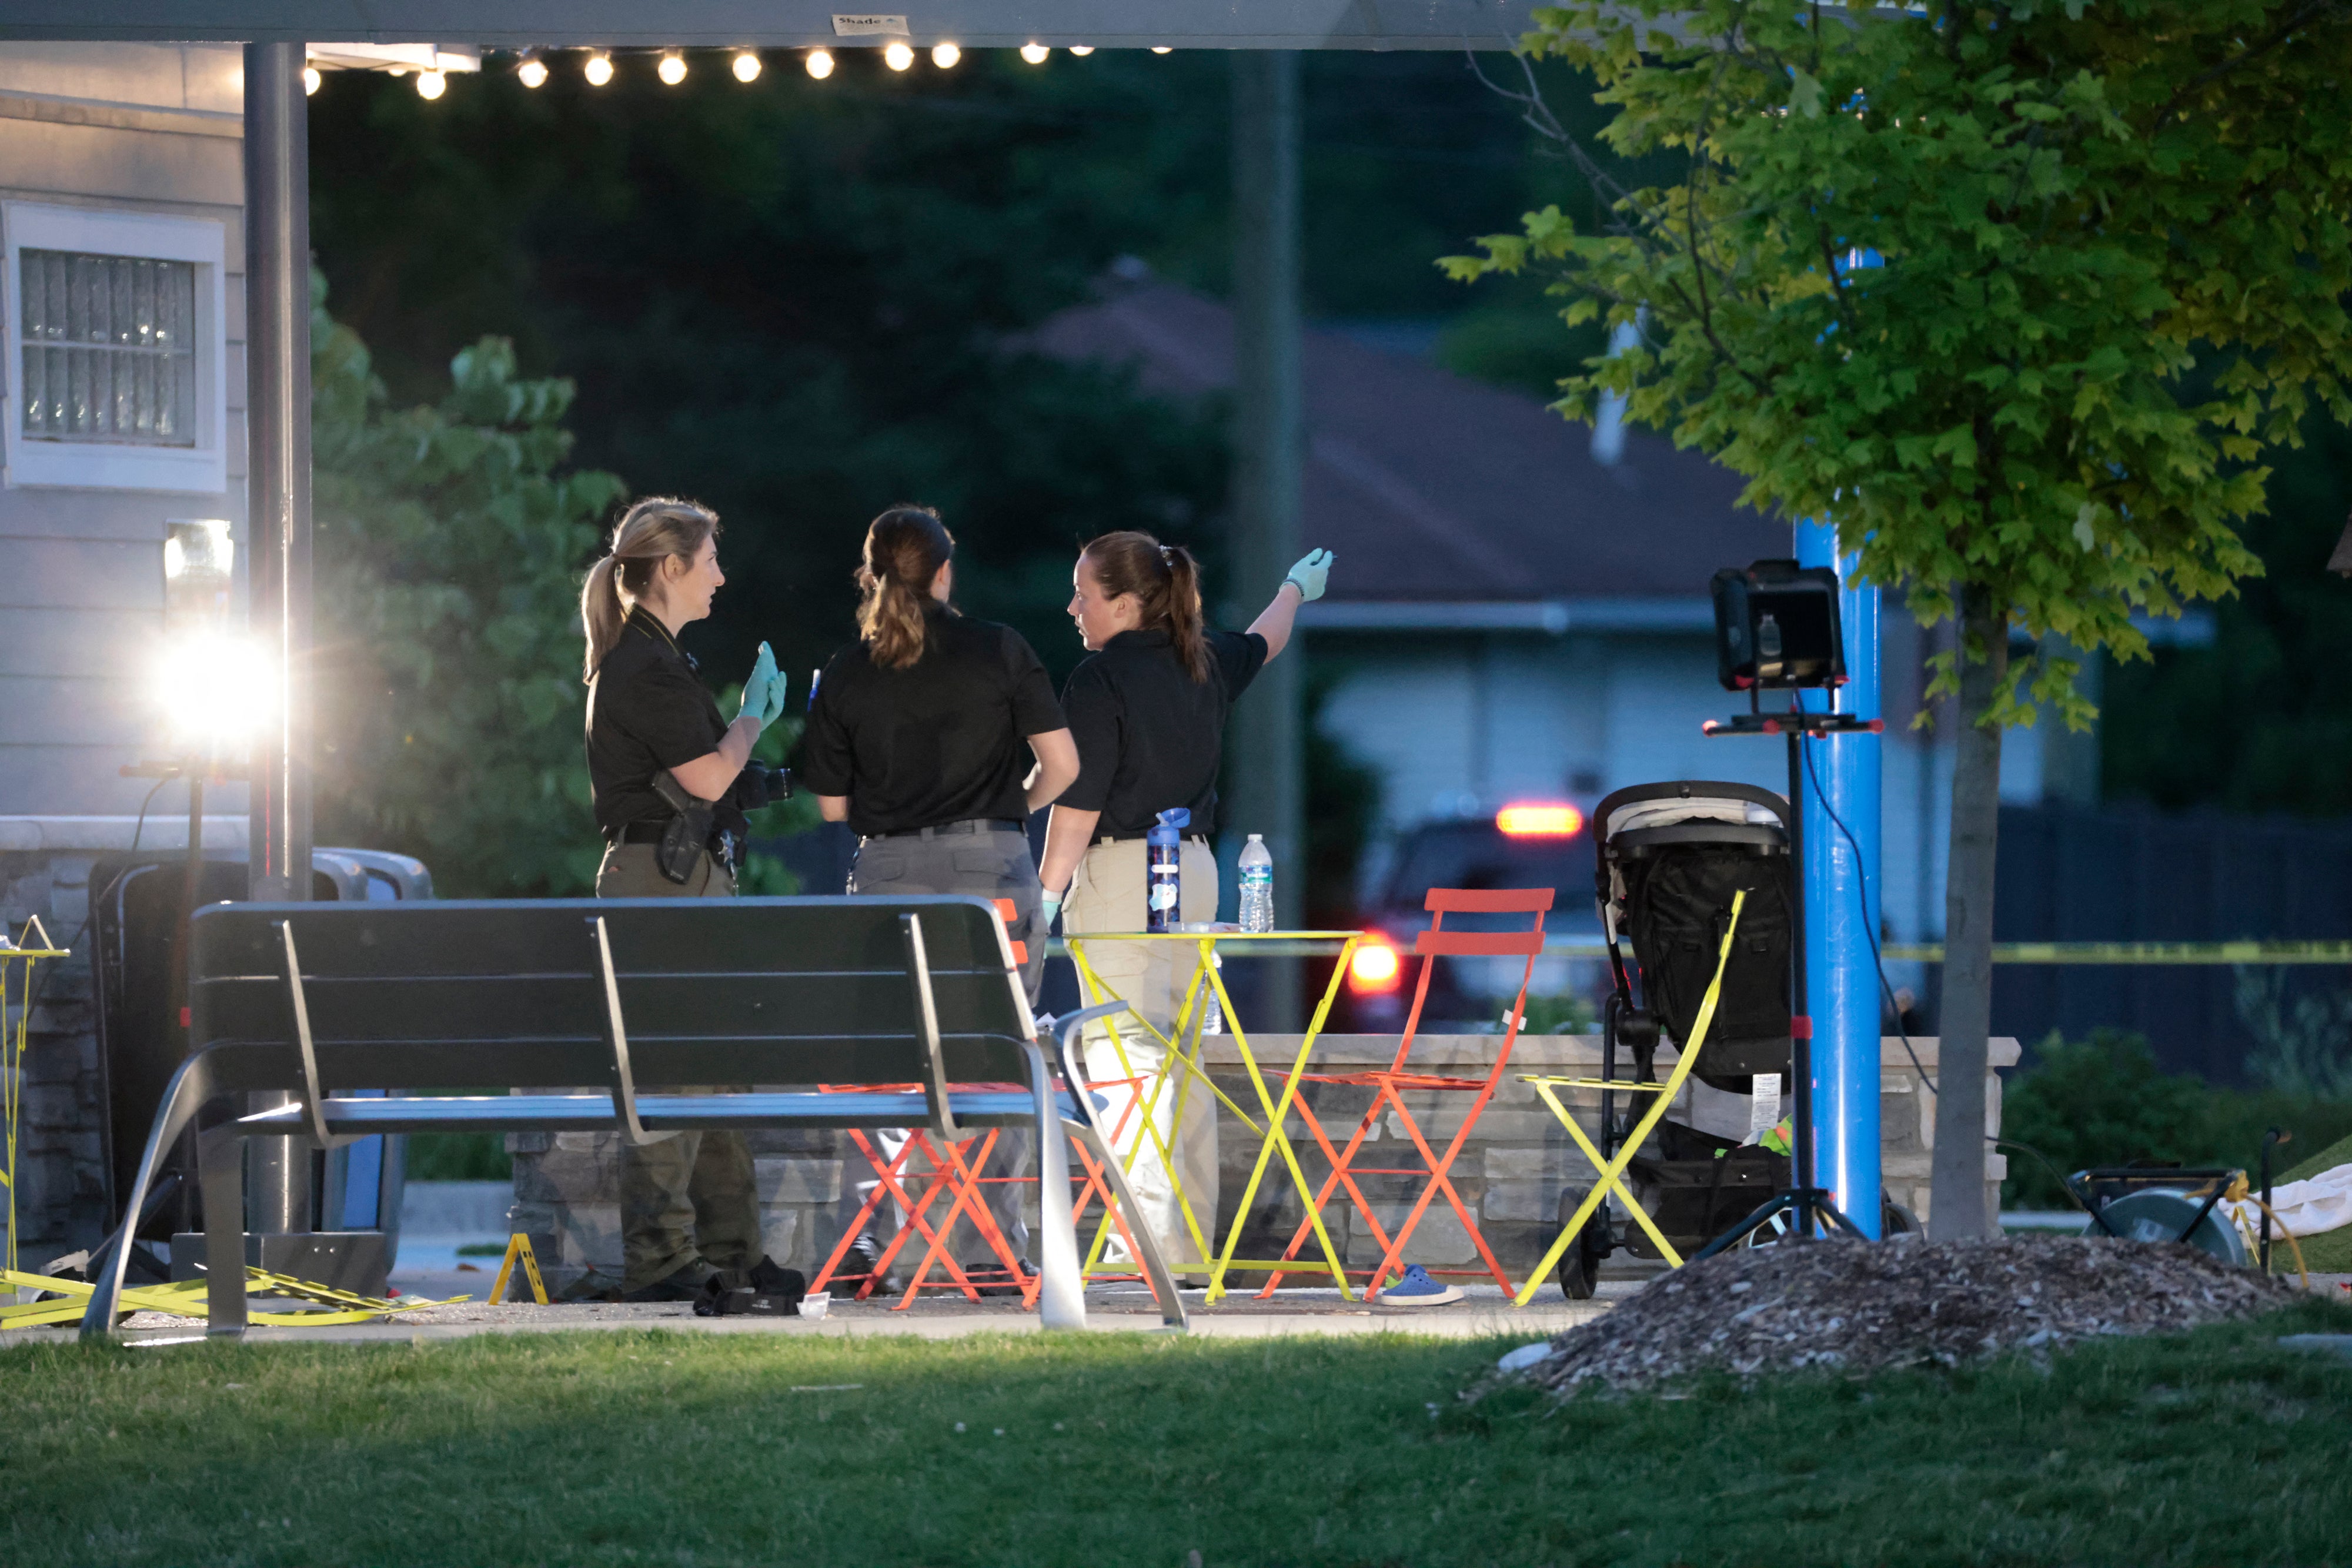 Police investigate the scene of a shooting at the Brooklands Plaza Splash Pad on June 15 in Rochester Hills, Michigan. Police have now identified the suspect as a 42-year-old man.